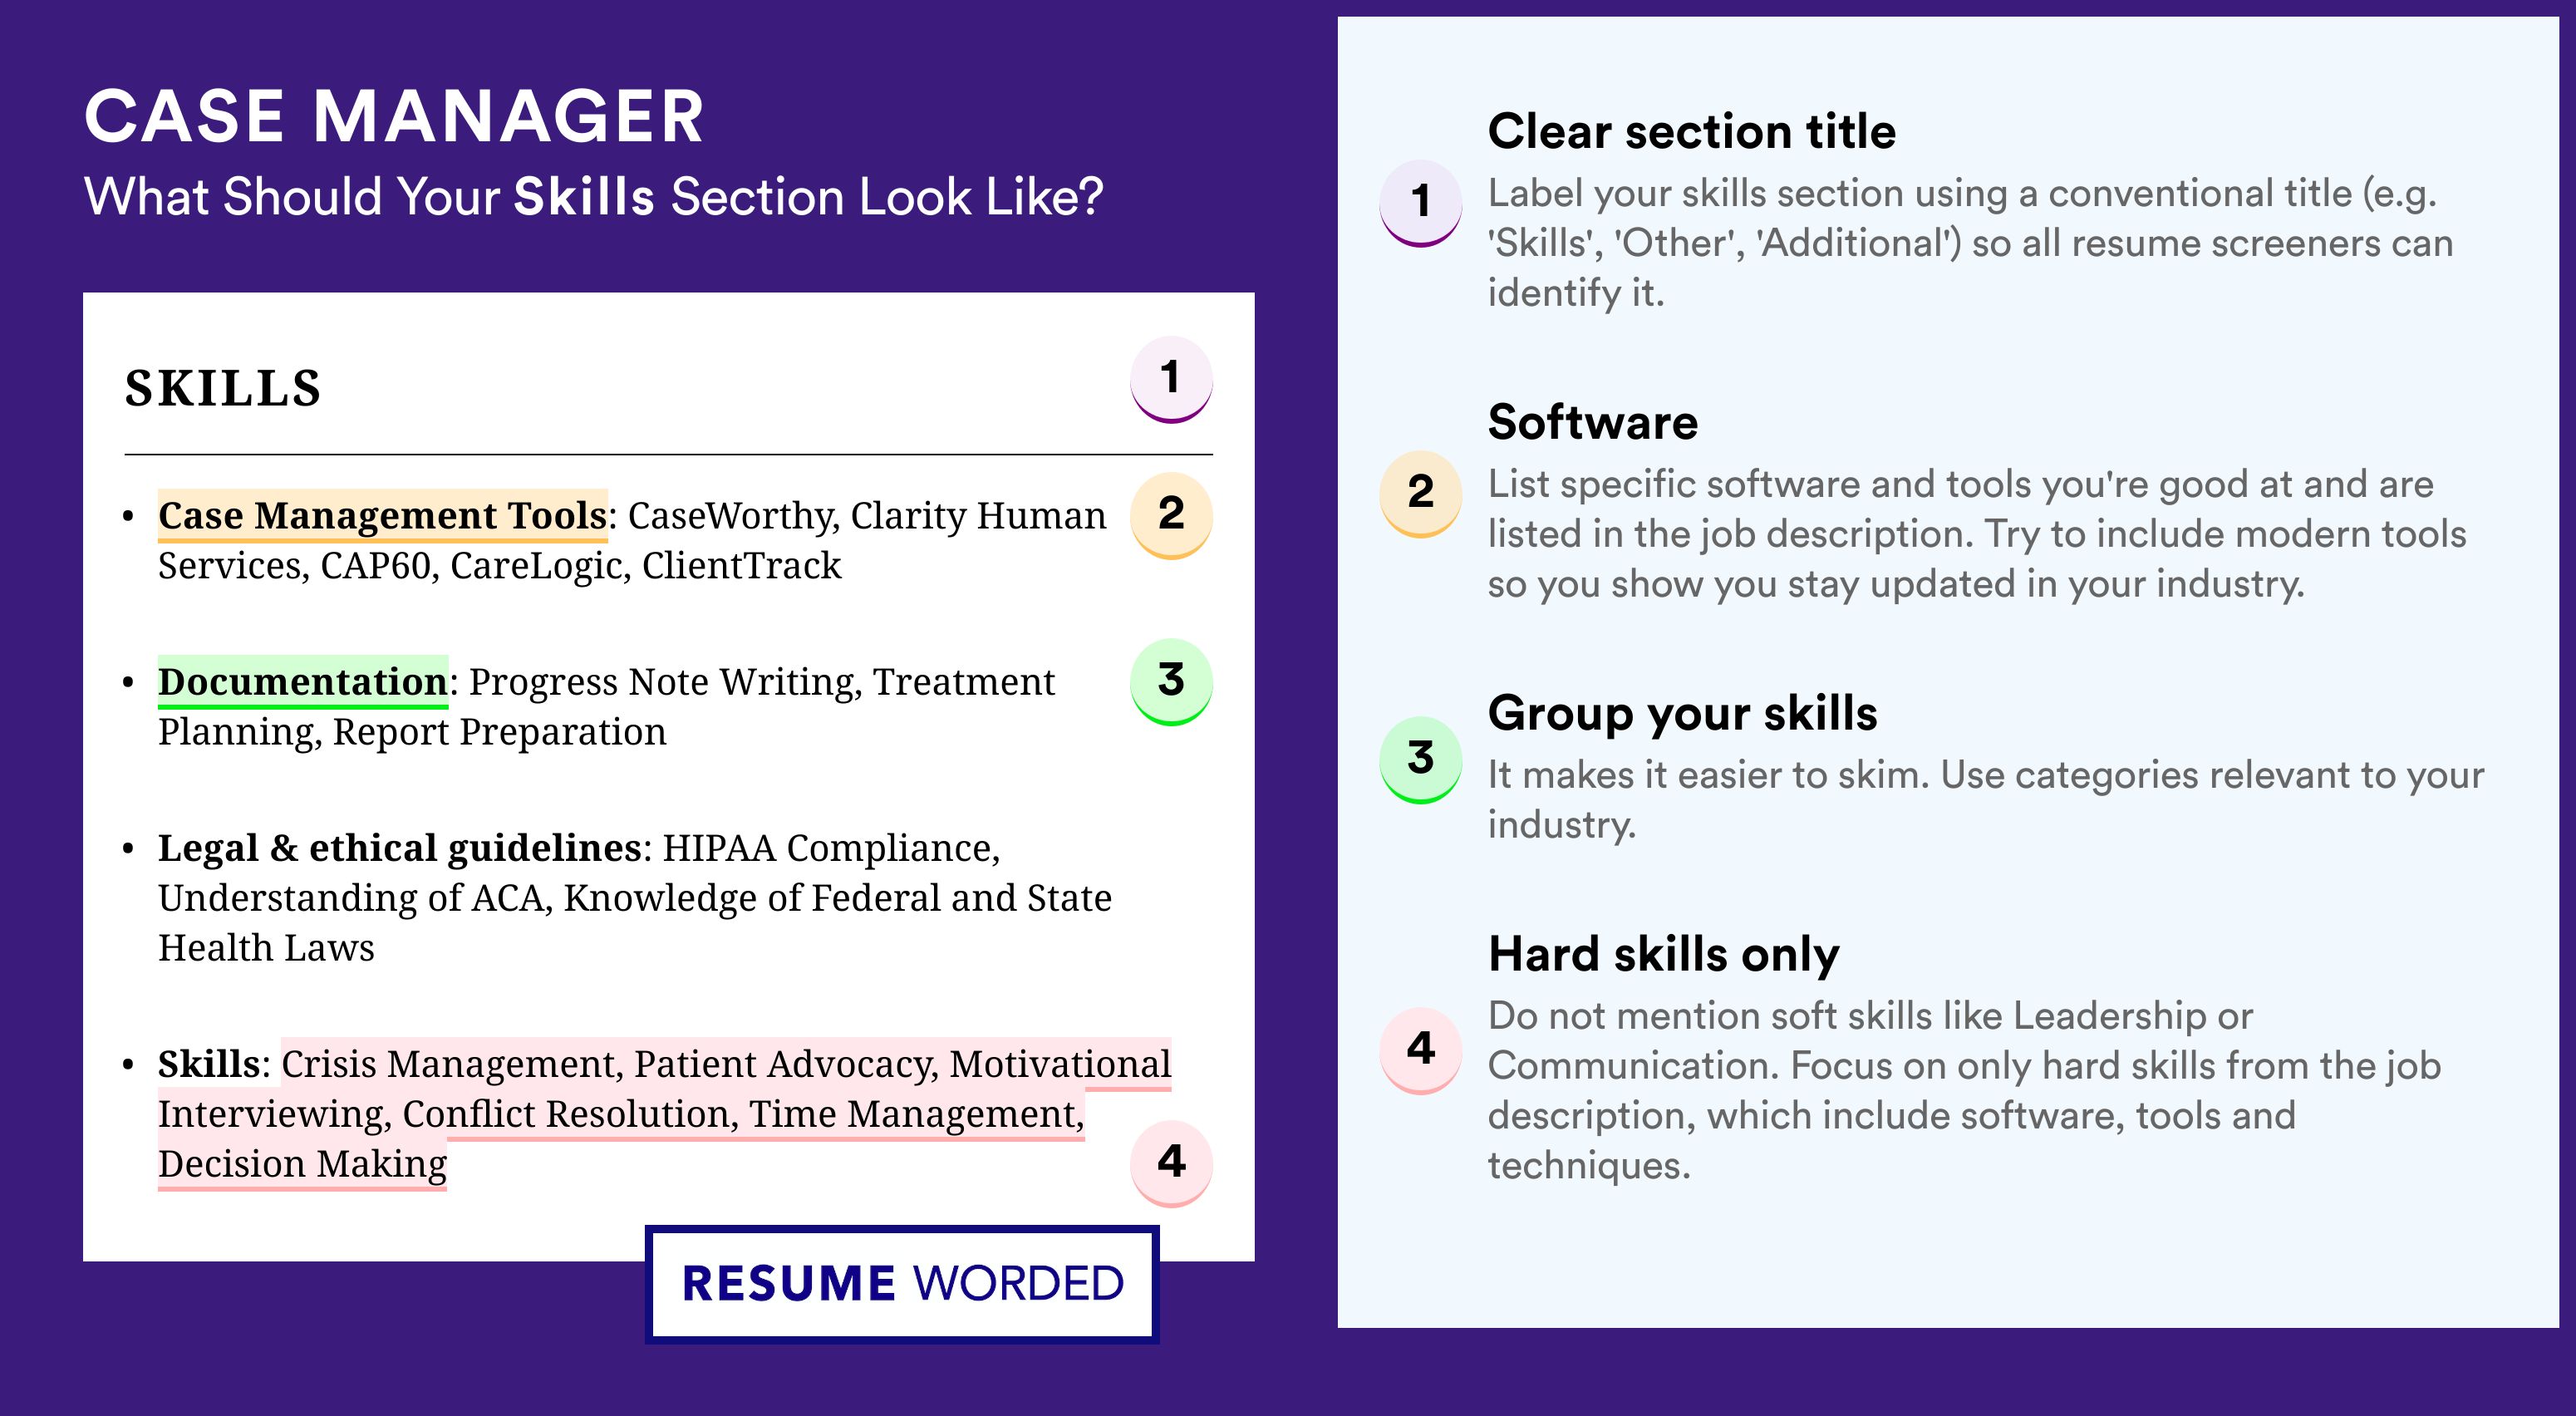 How To Write Your Skills Section - Case Manager Roles